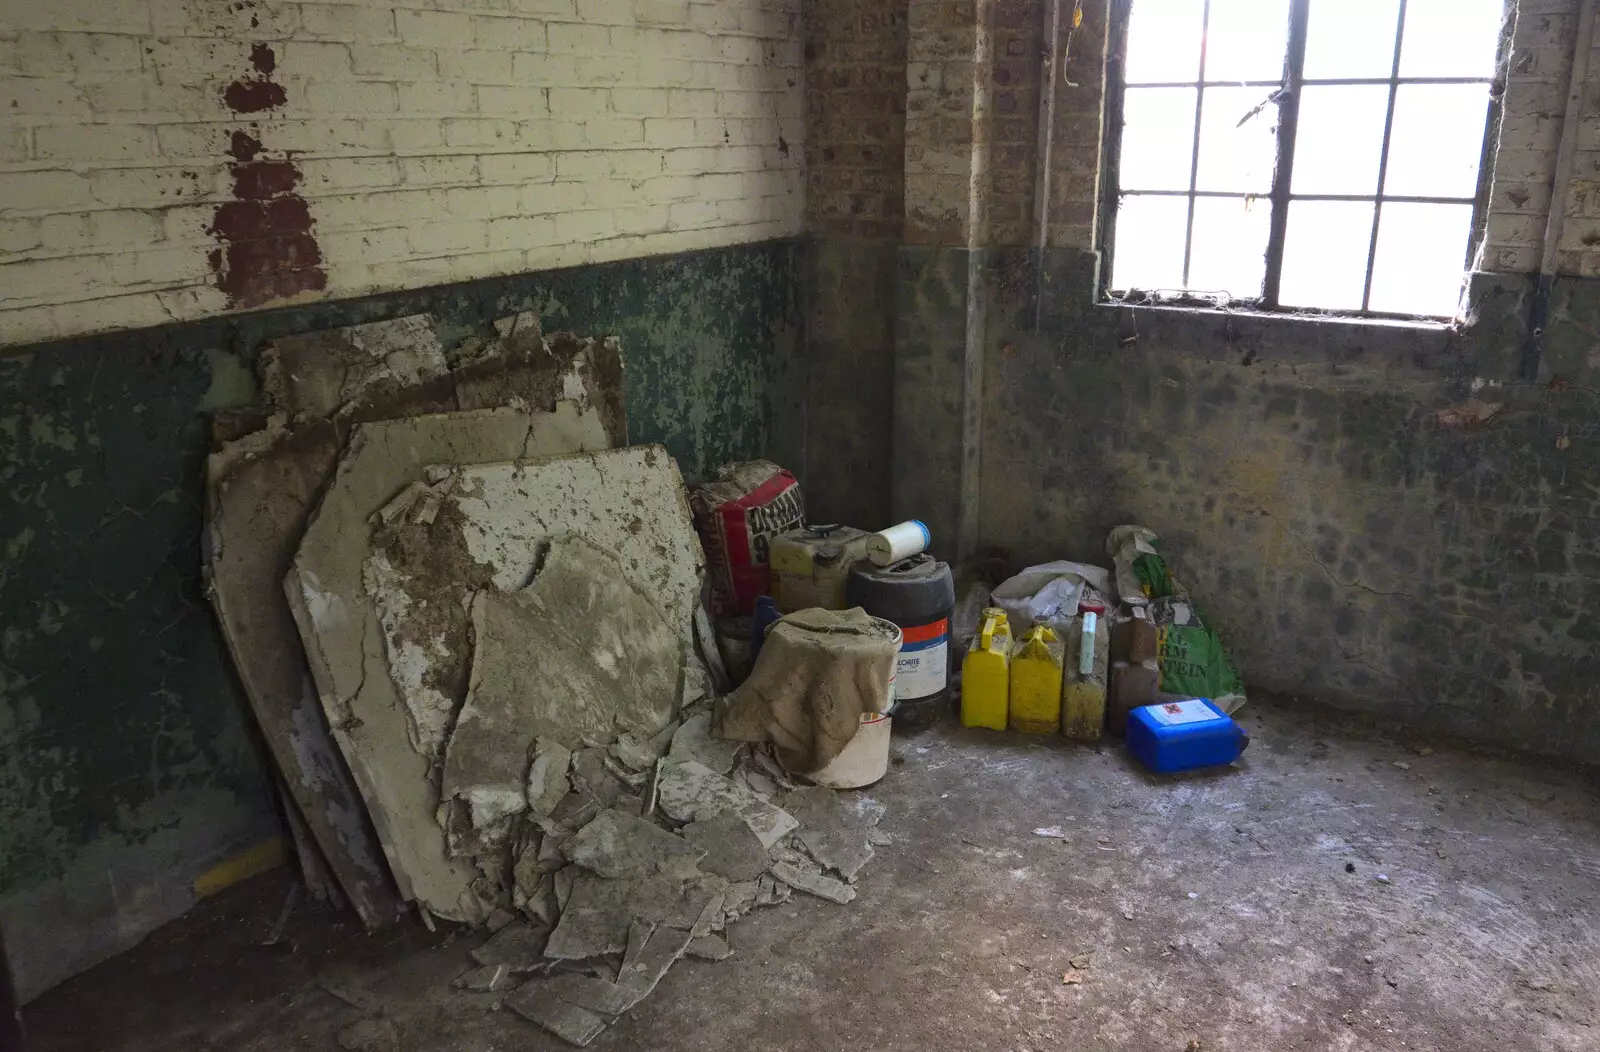 Detritus in the corner of a building, from A 1940s Timewarp, Site 4, Bungay Airfield, Flixton, Suffolk - 9th June 2022